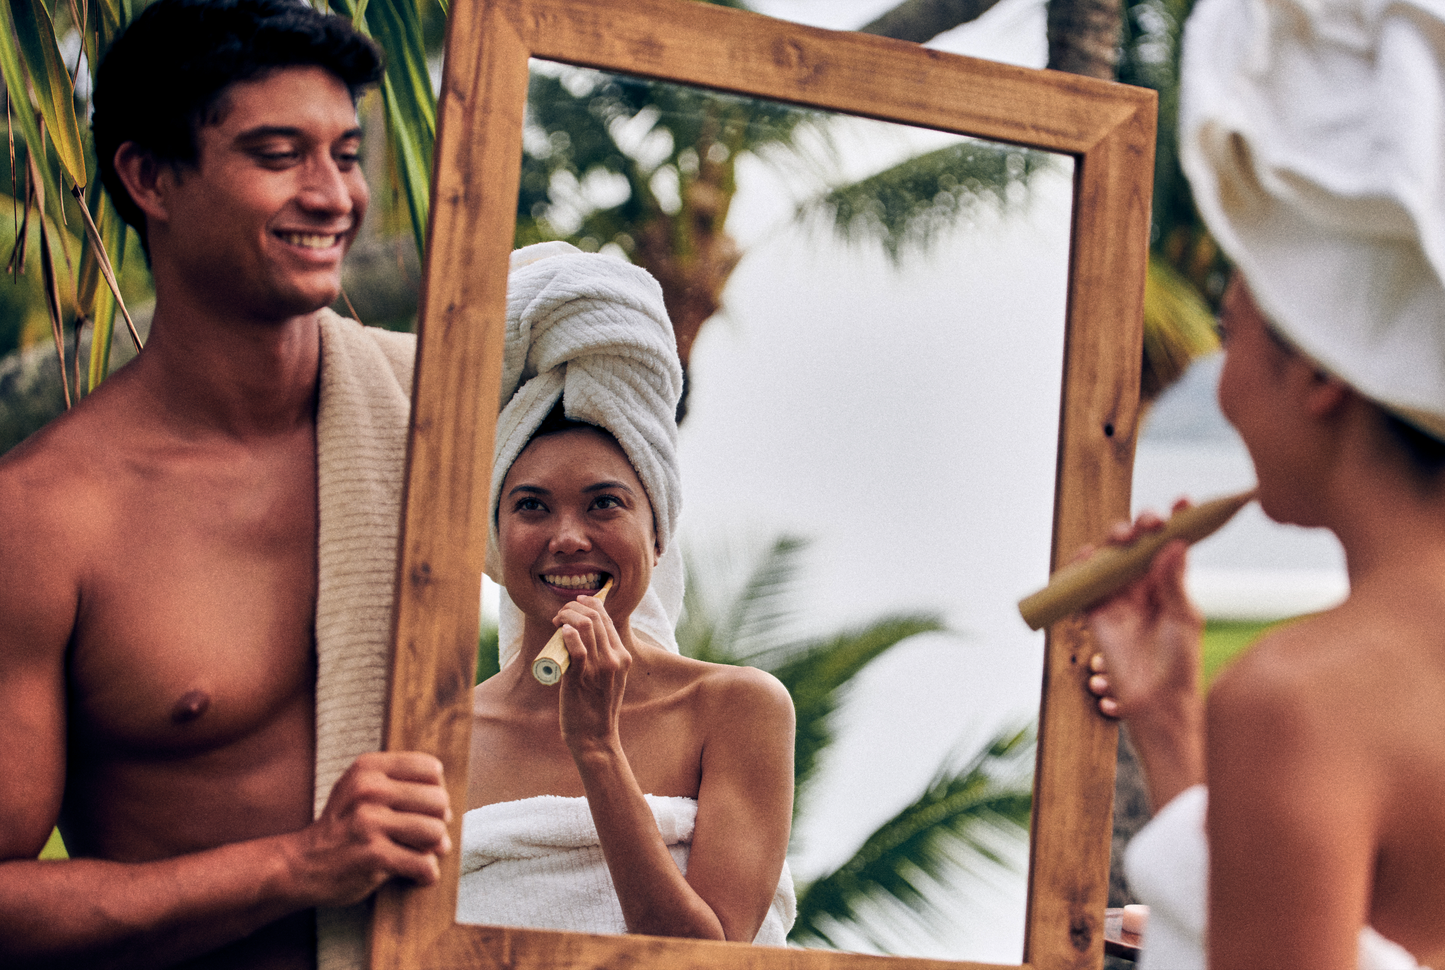 Woman brushing her teeth with a sonic bamboo electric toothbrush and US-made fluoride free mint toothpaste tablets looking into a mirror being held by a shirtless man